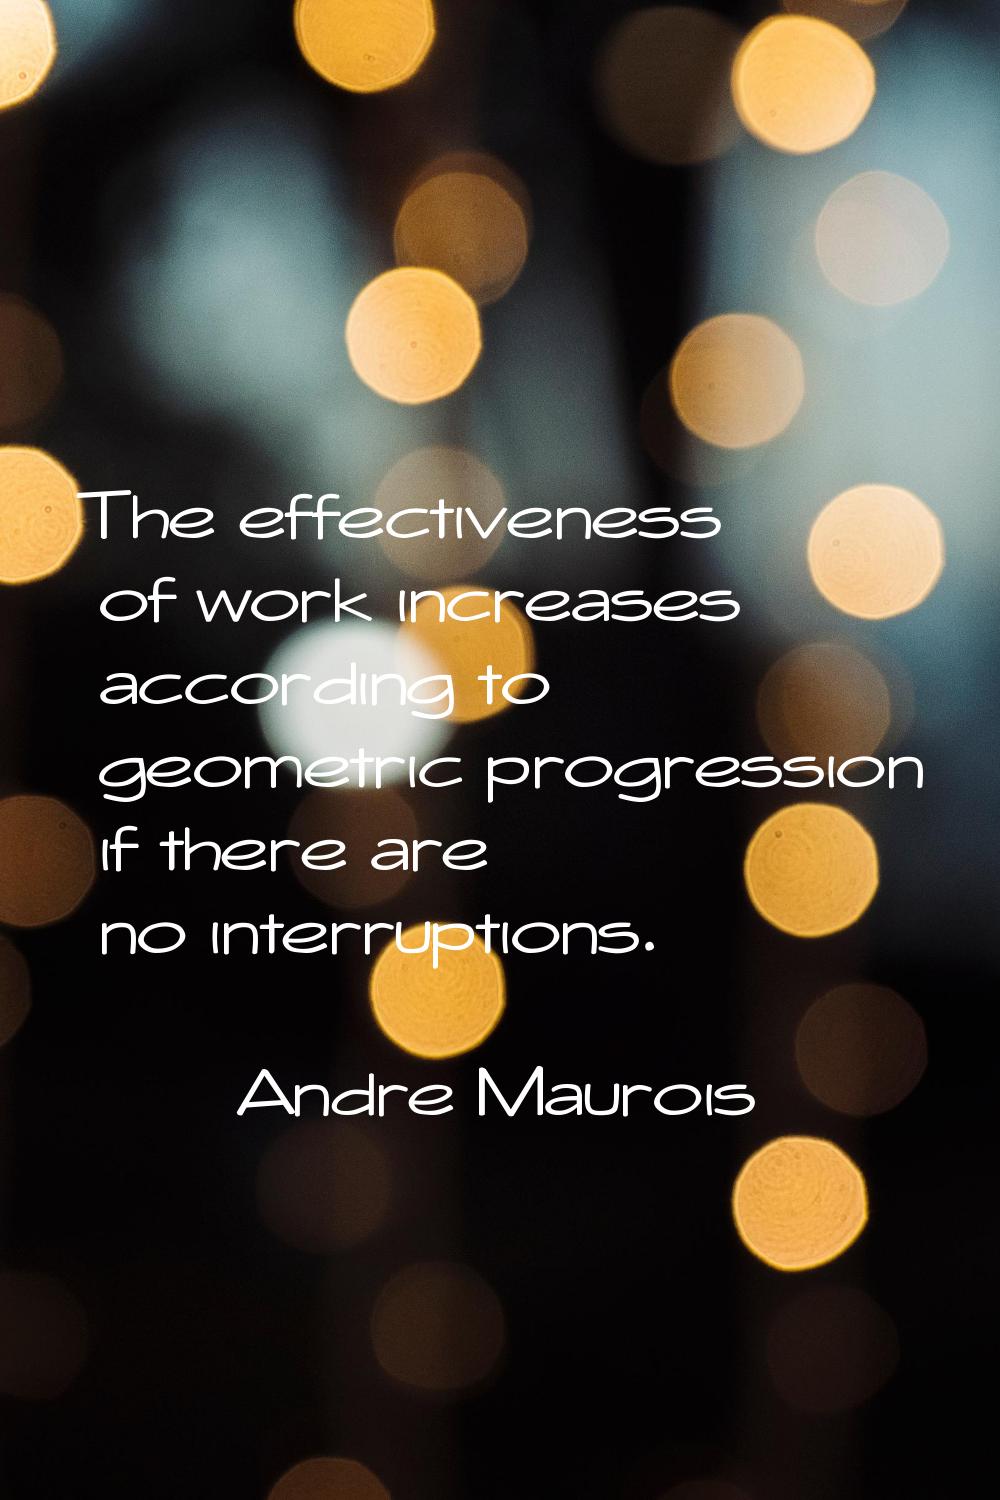 The effectiveness of work increases according to geometric progression if there are no interruption